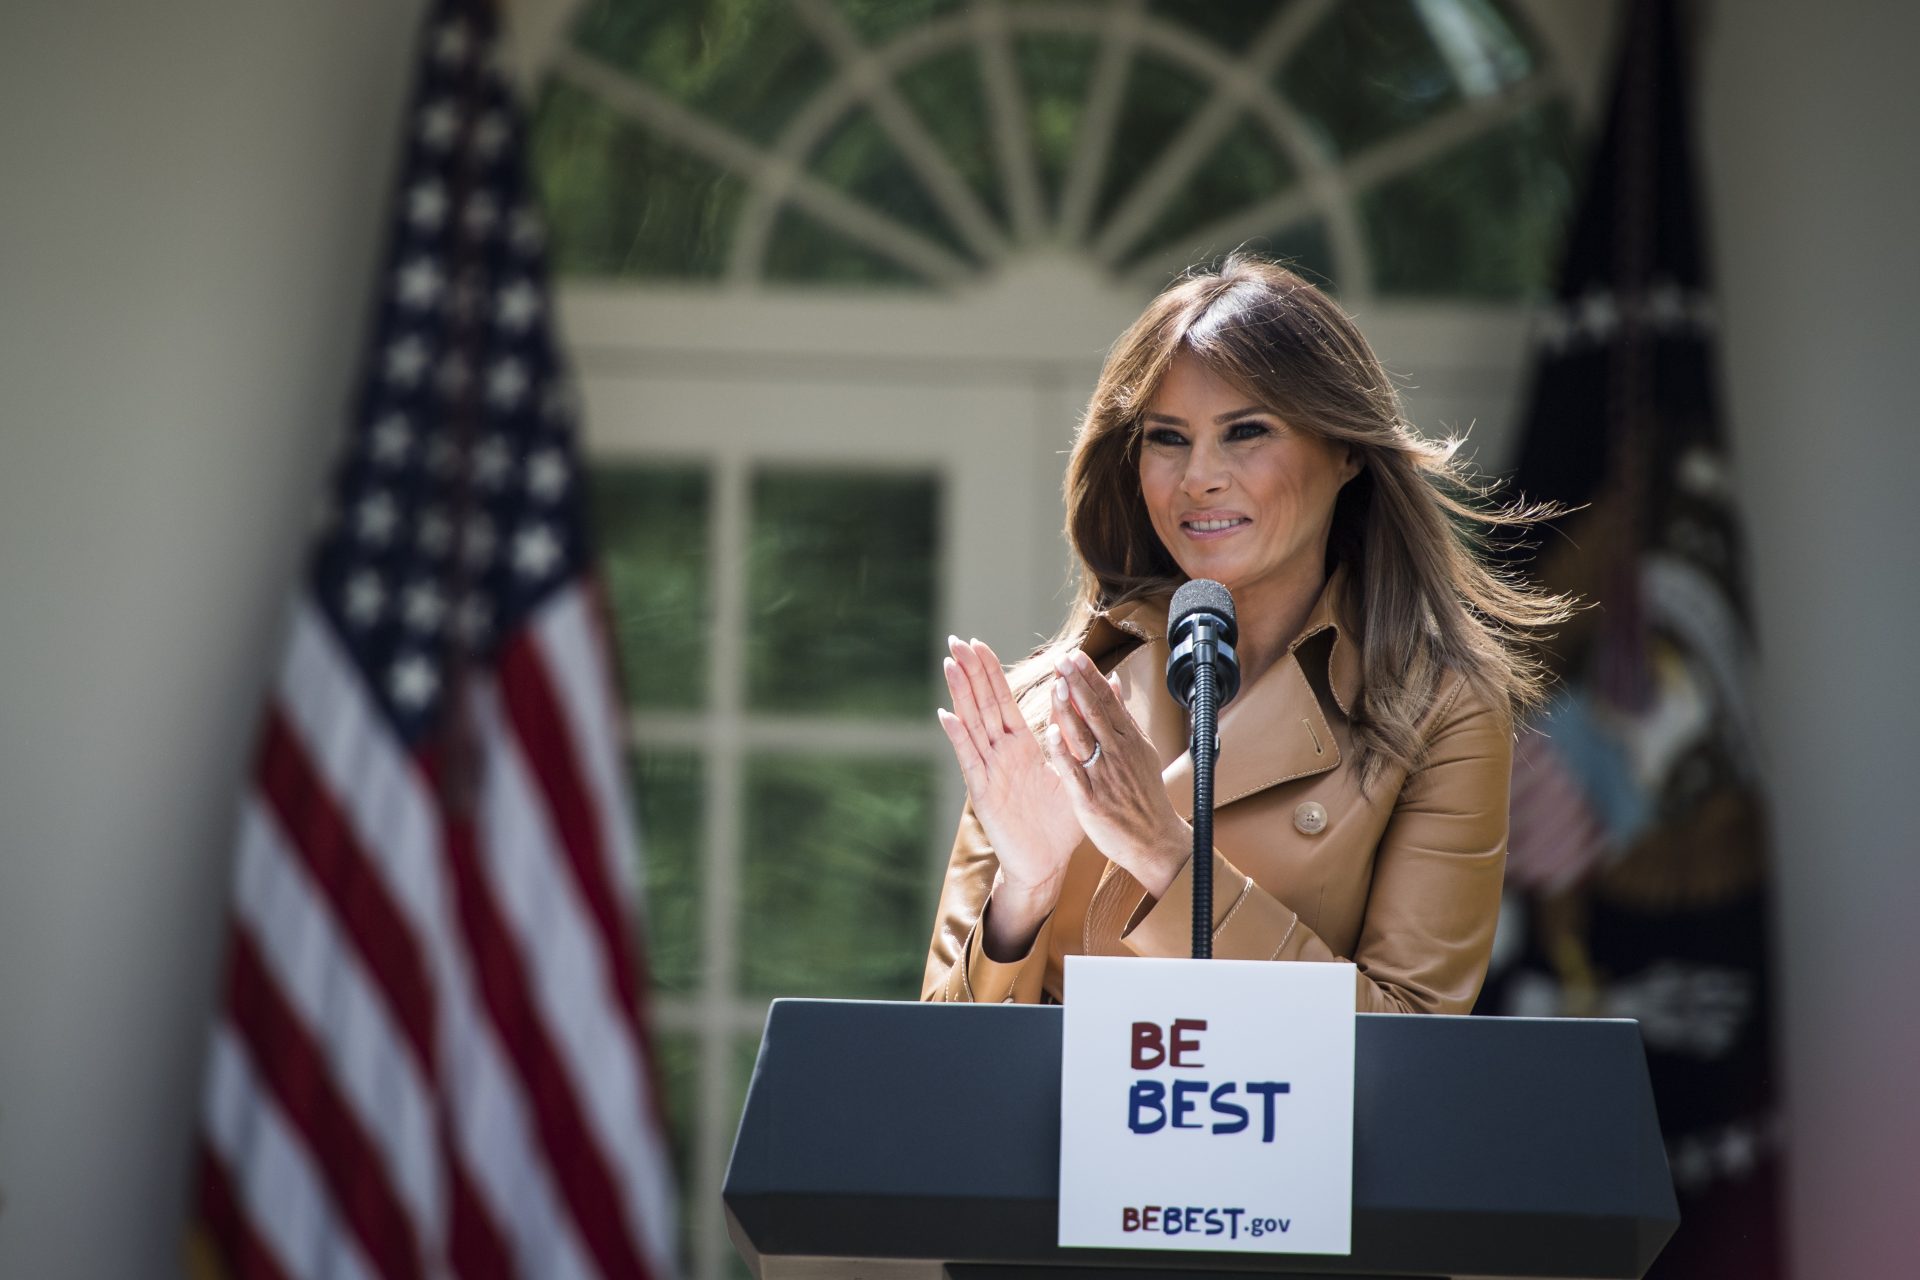 Melania Trump and the 'Be best' campaign